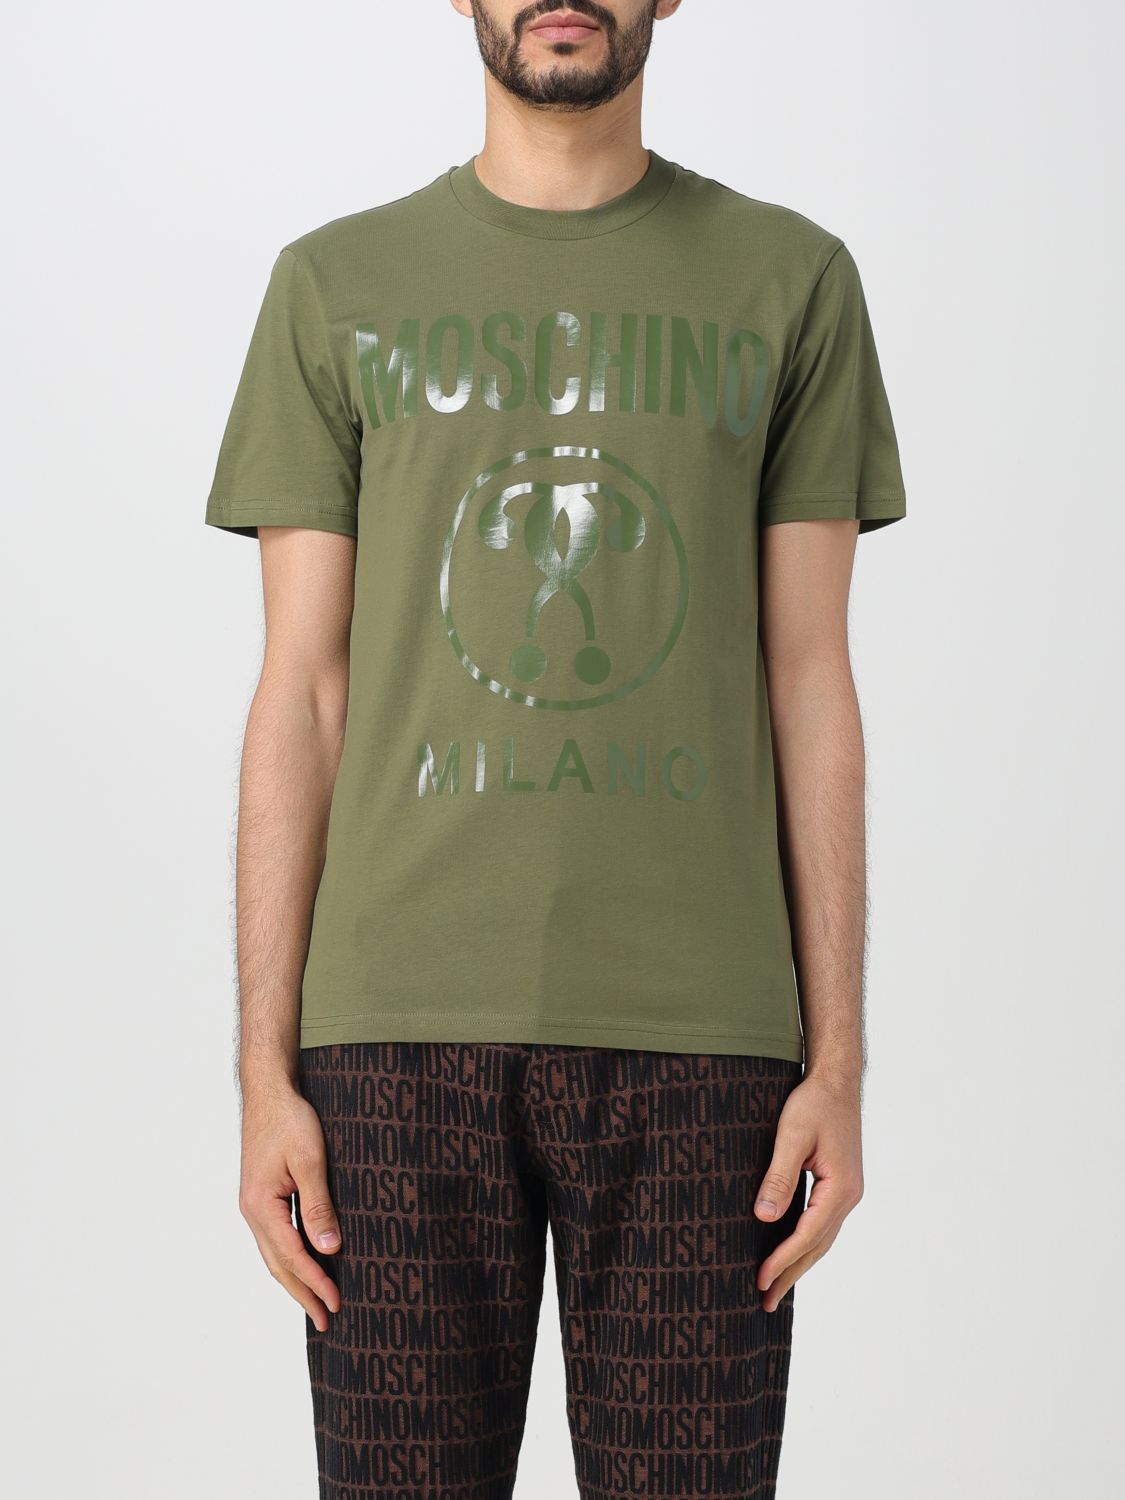 Moschino Couture T-shirt  Men Color Military